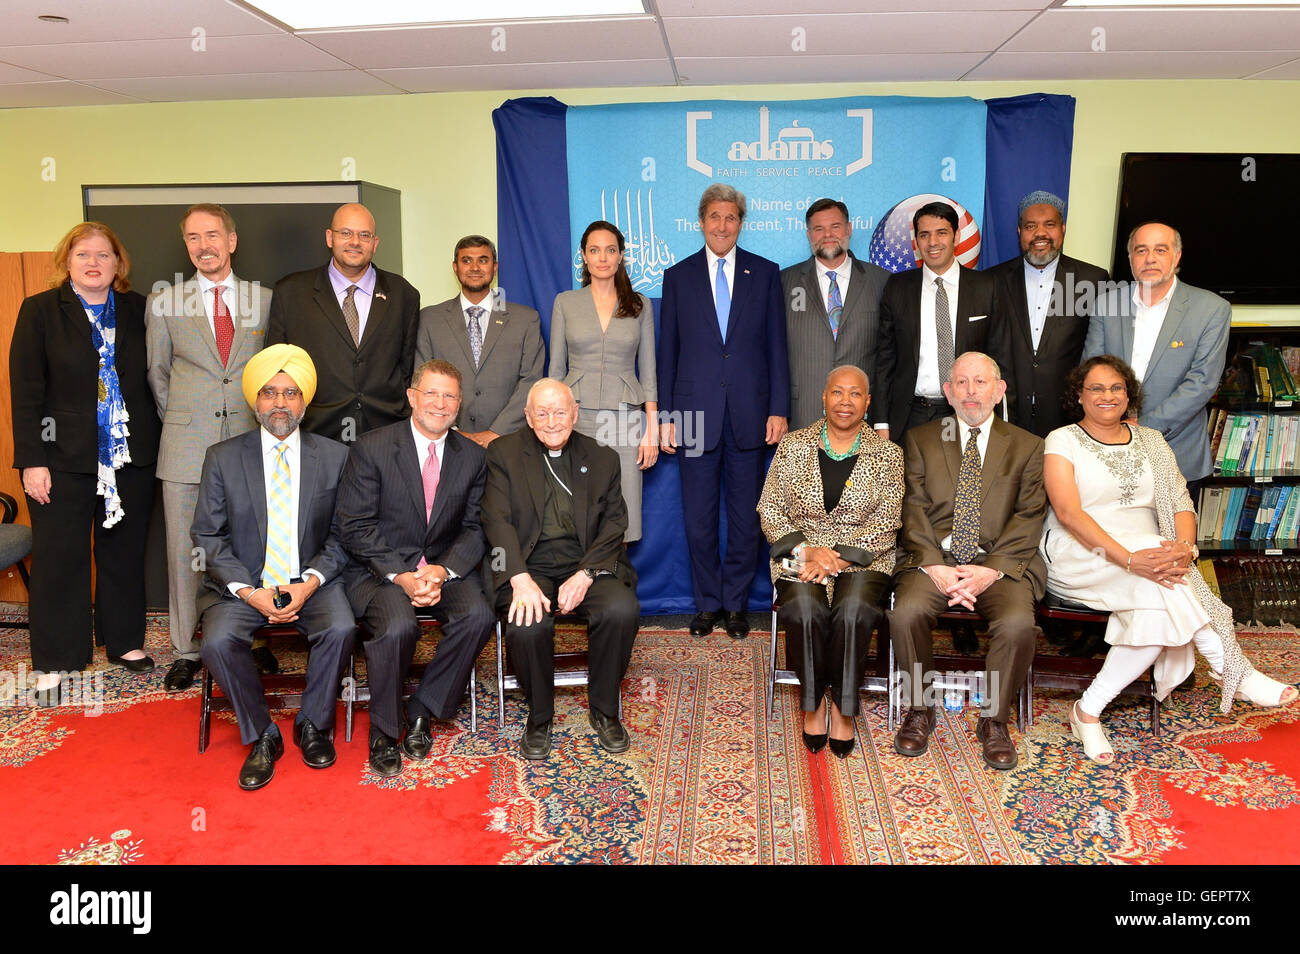 Secretary Kerry and UNHCR Special Envoy Jolie Pitt Pose for a Photo With Interfaith Leaders at an Iftar Reception to Mark World Refugee Day Stock Photo